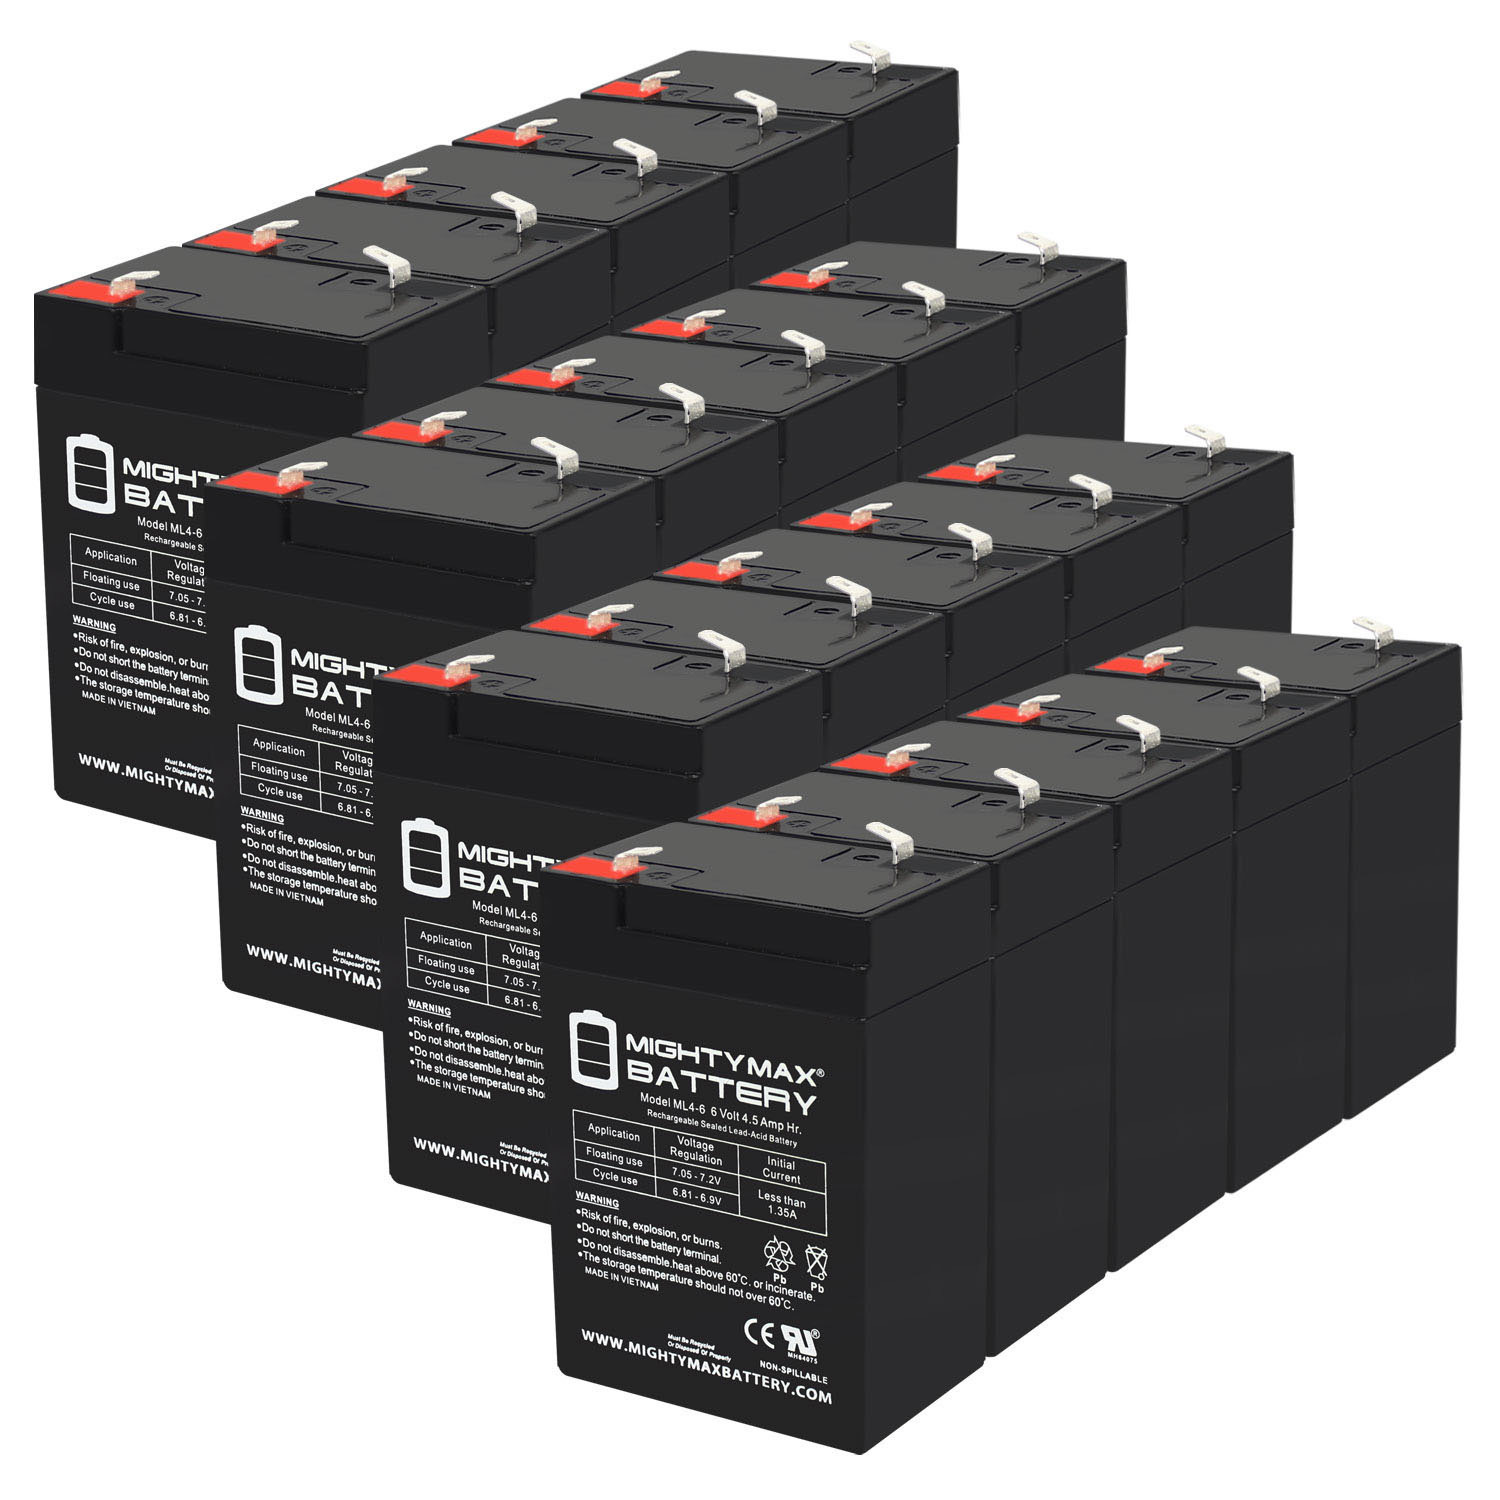 6V 4.5AH Replacement Battery for Parasystems PE6-4 - 20 Pack